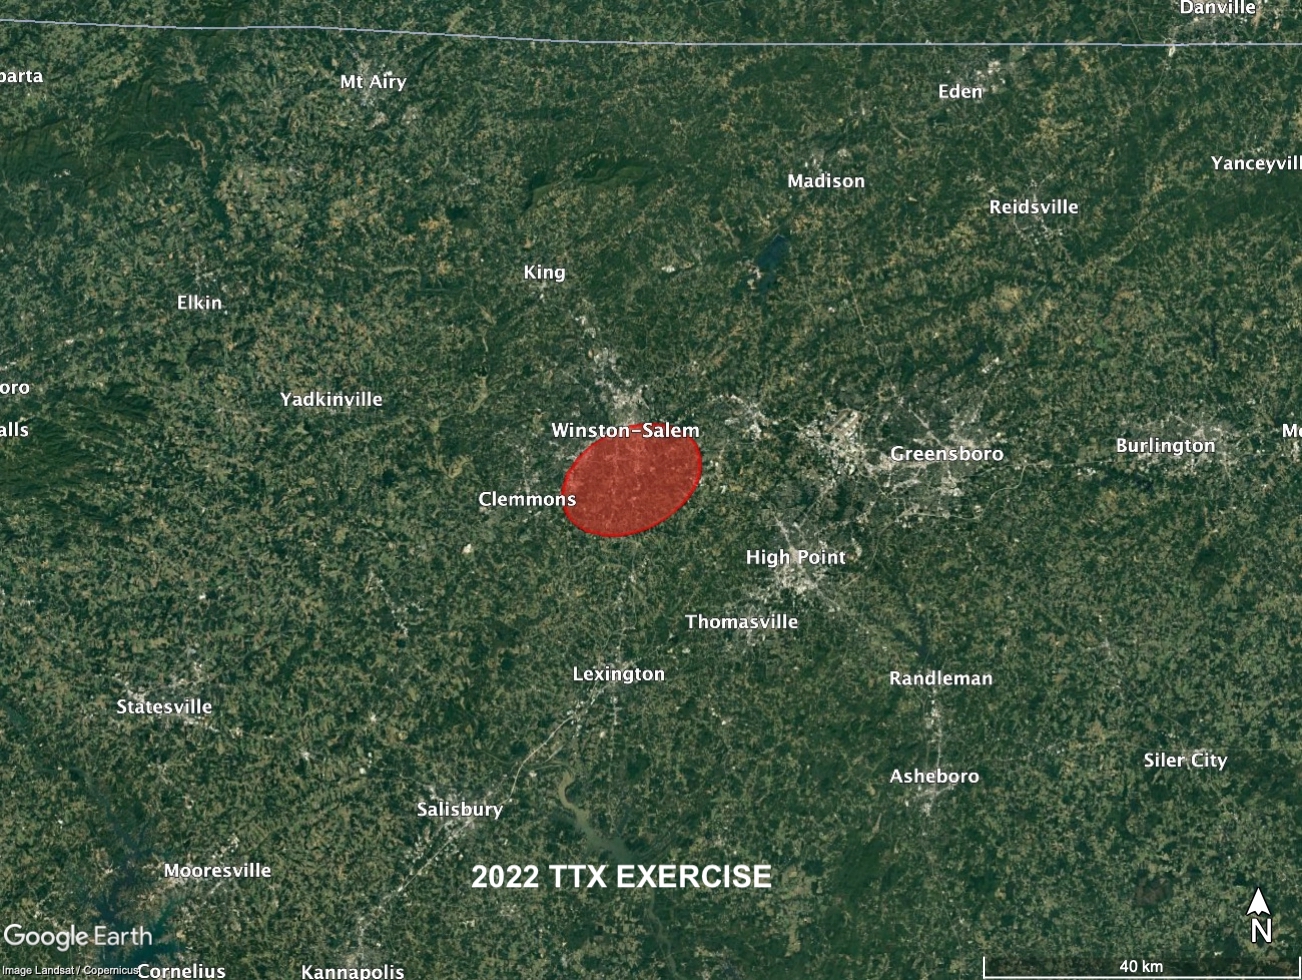 This image shows the predicted impact region for 2022 TTX, as of August 10, 2022